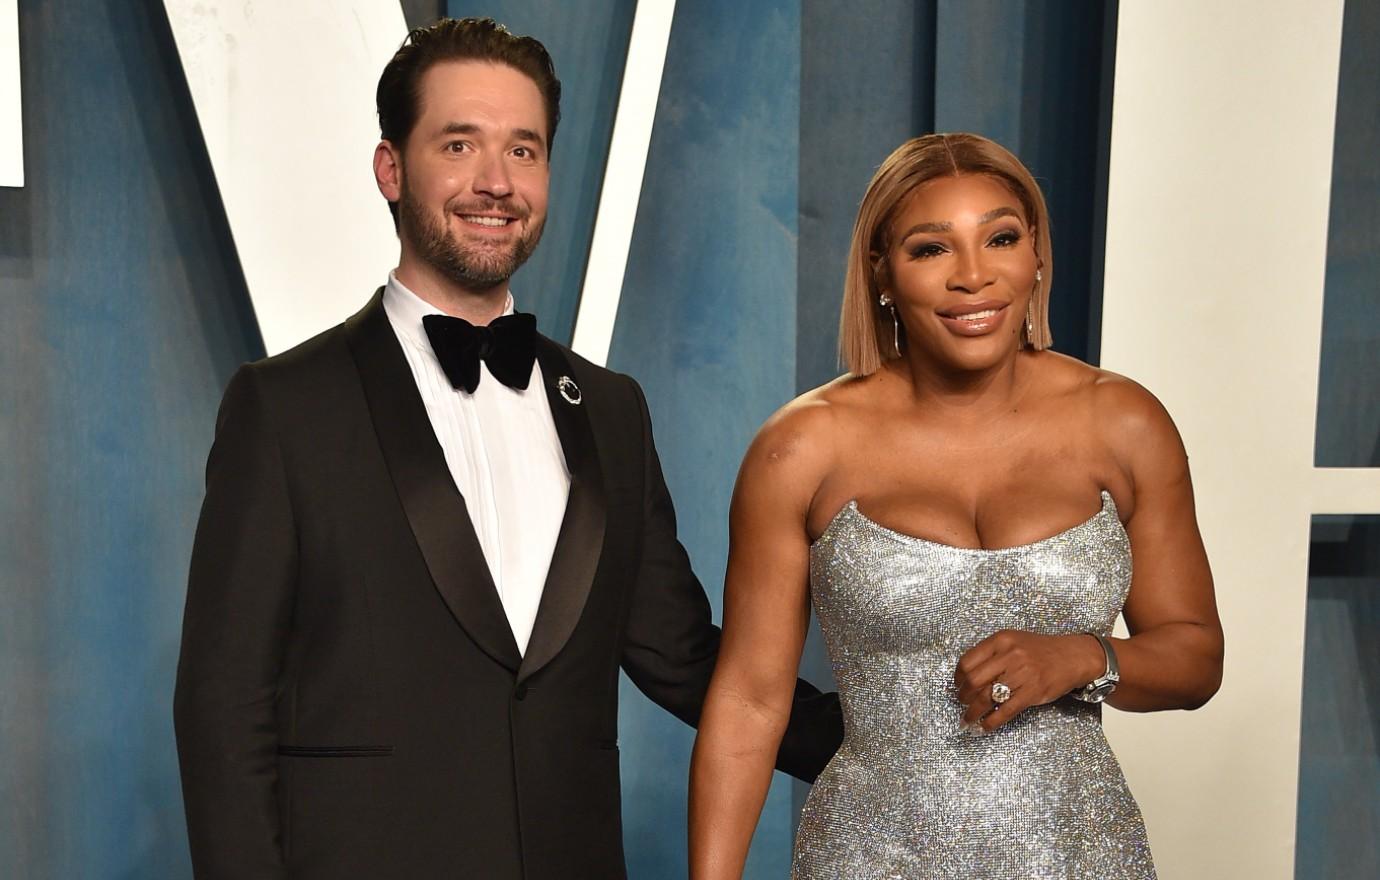 I became a husband and a father, I became a Man - Alexis Ohanian recalls  his wedding to Serena Williams 5 years ago